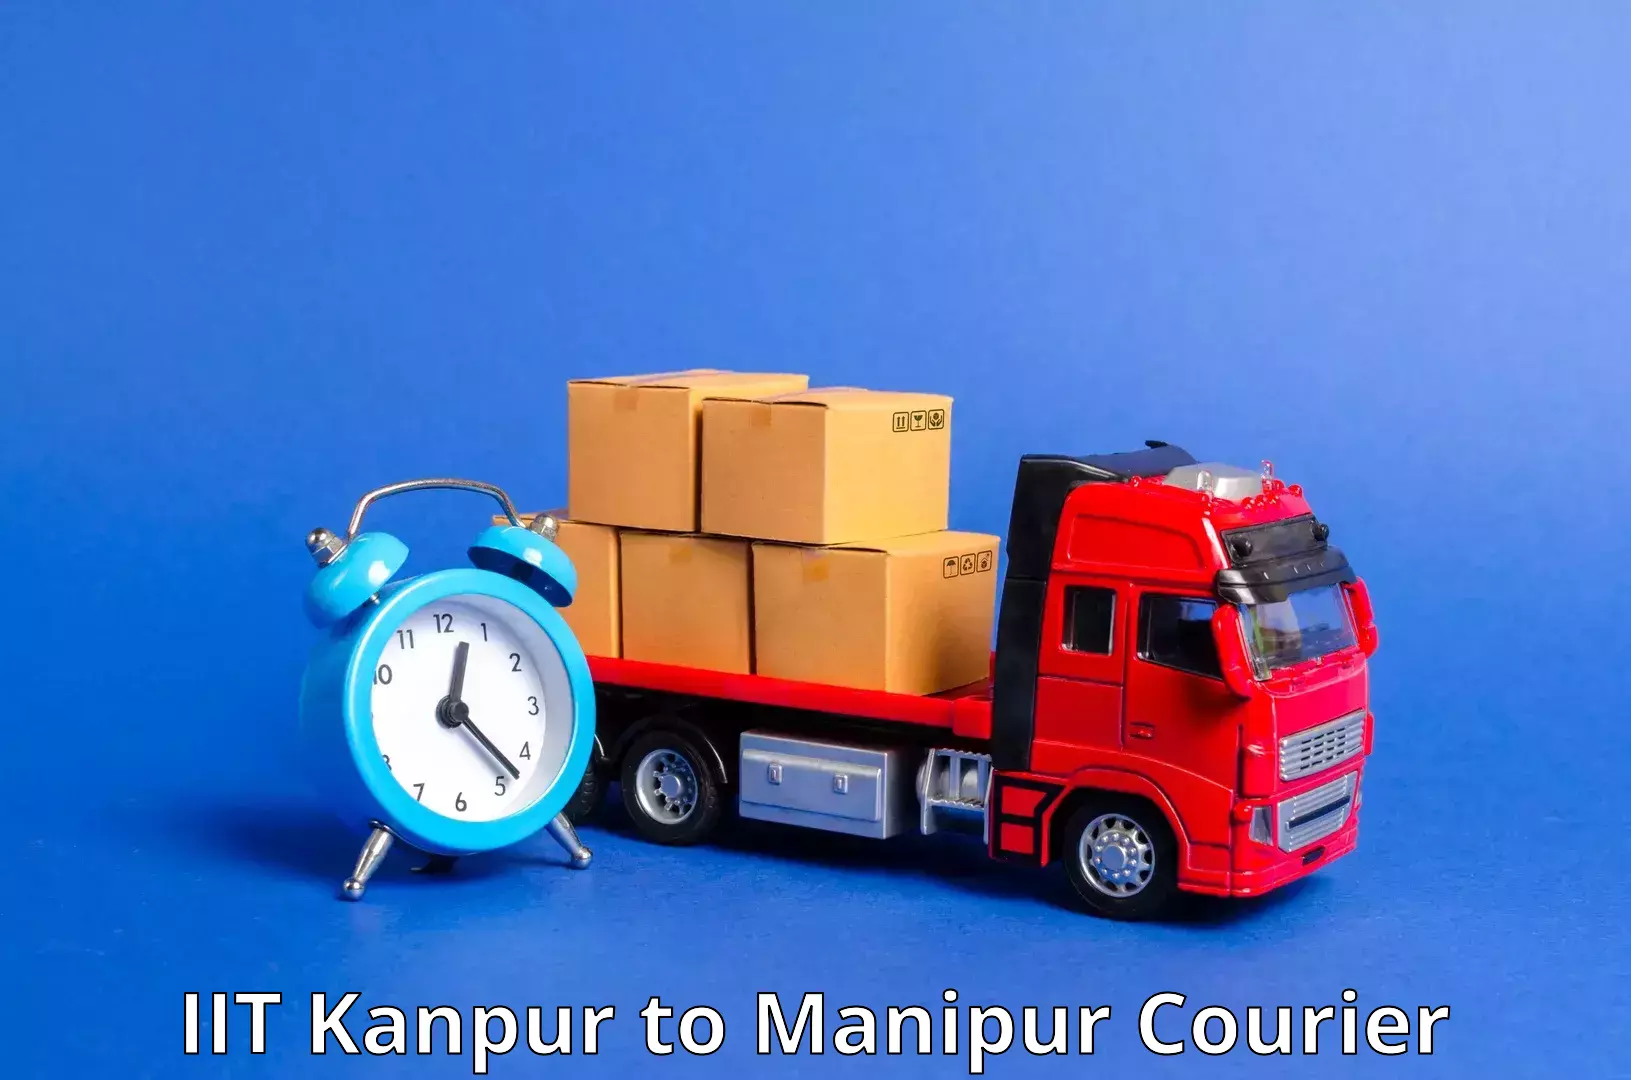 On-call courier service IIT Kanpur to Manipur